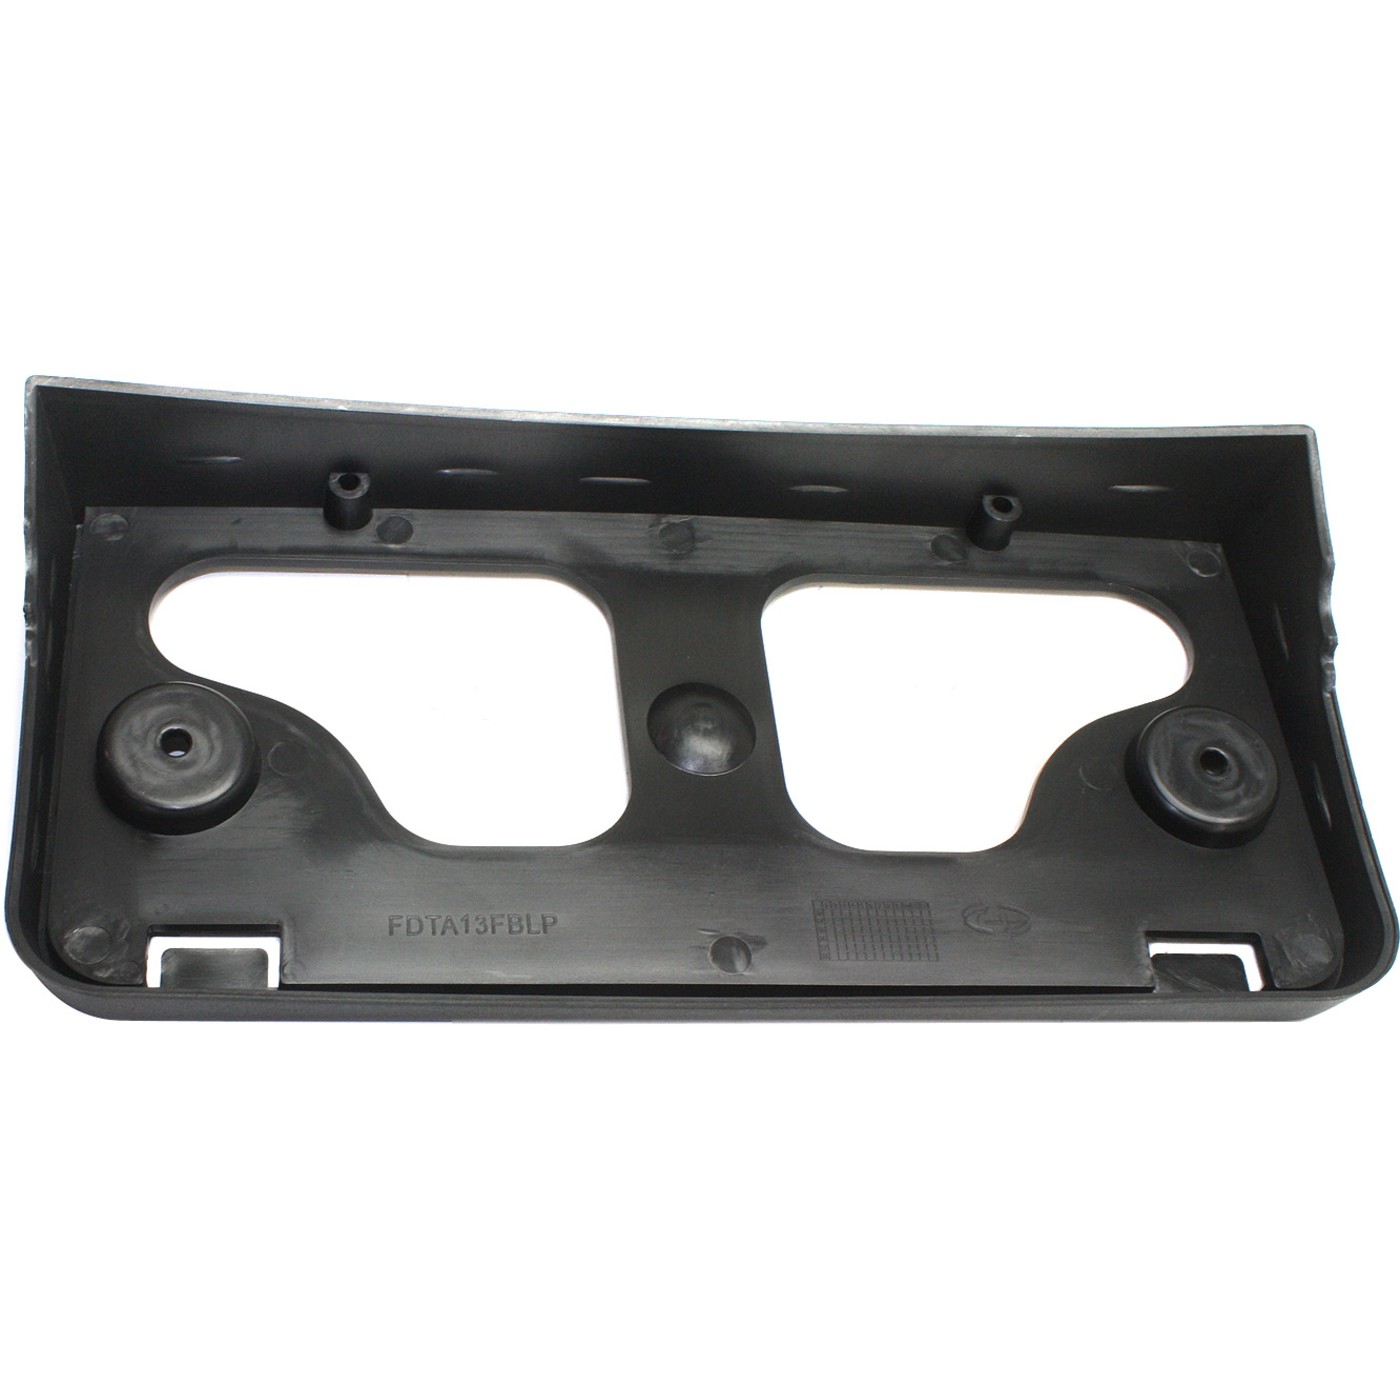 New License Plate Bracket Front Ford Taurus 2013-2016 FO1068150 DG1Z17A385AA | eBay 2015 Ford Taurus Front License Plate Bracket